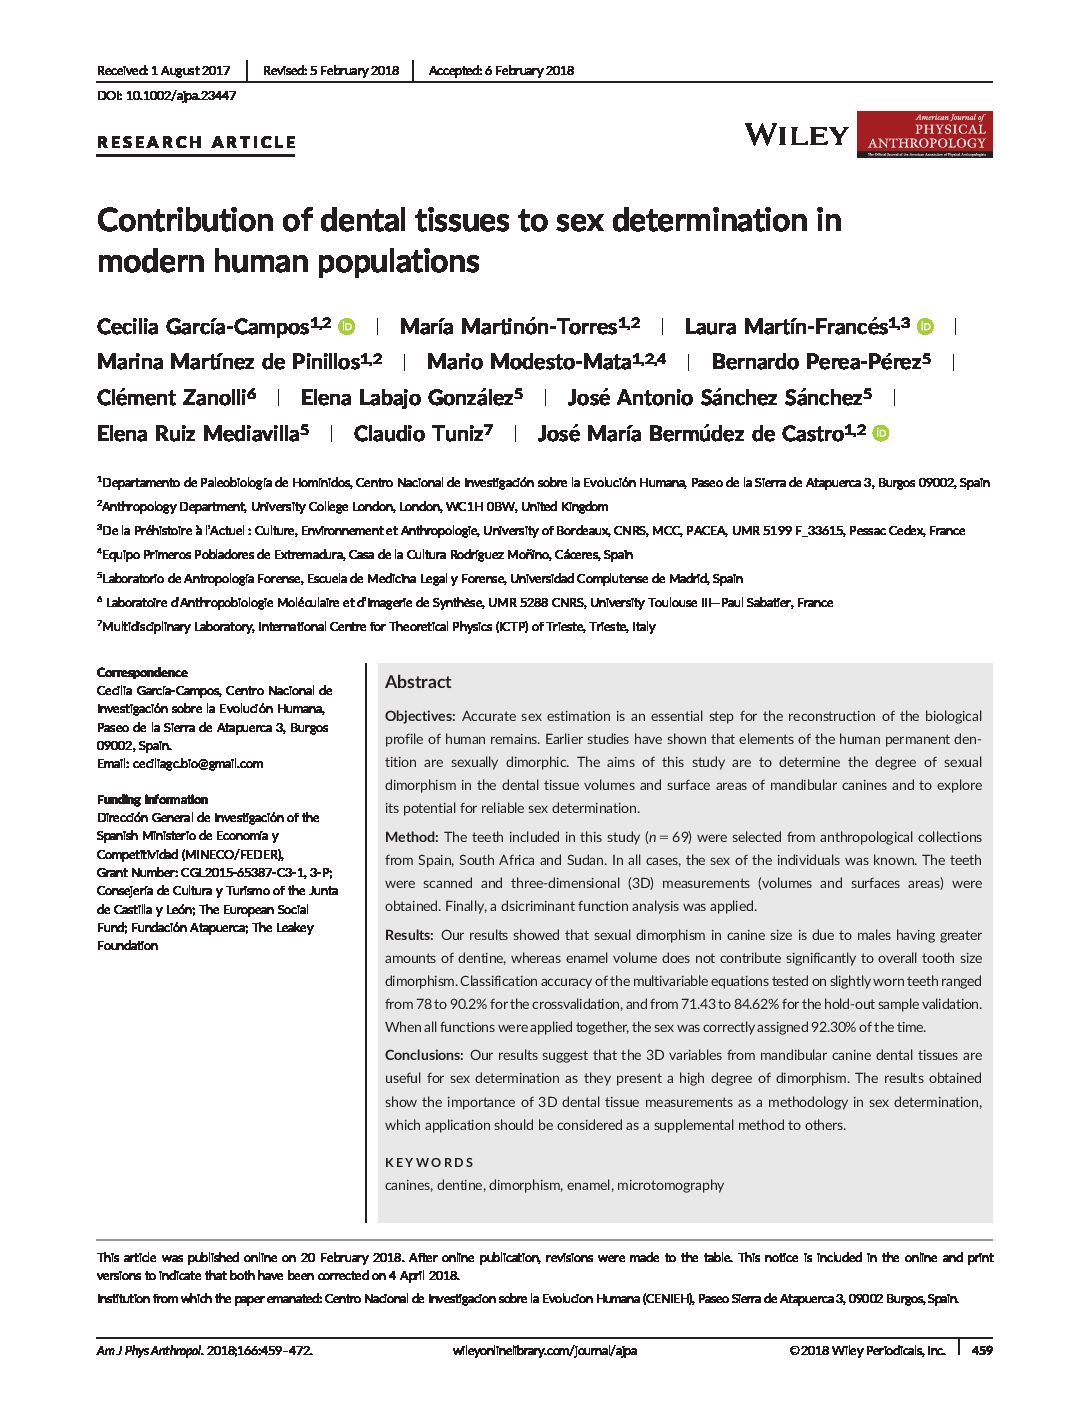 Contribution of dental tissues to sex determination in modern human populations